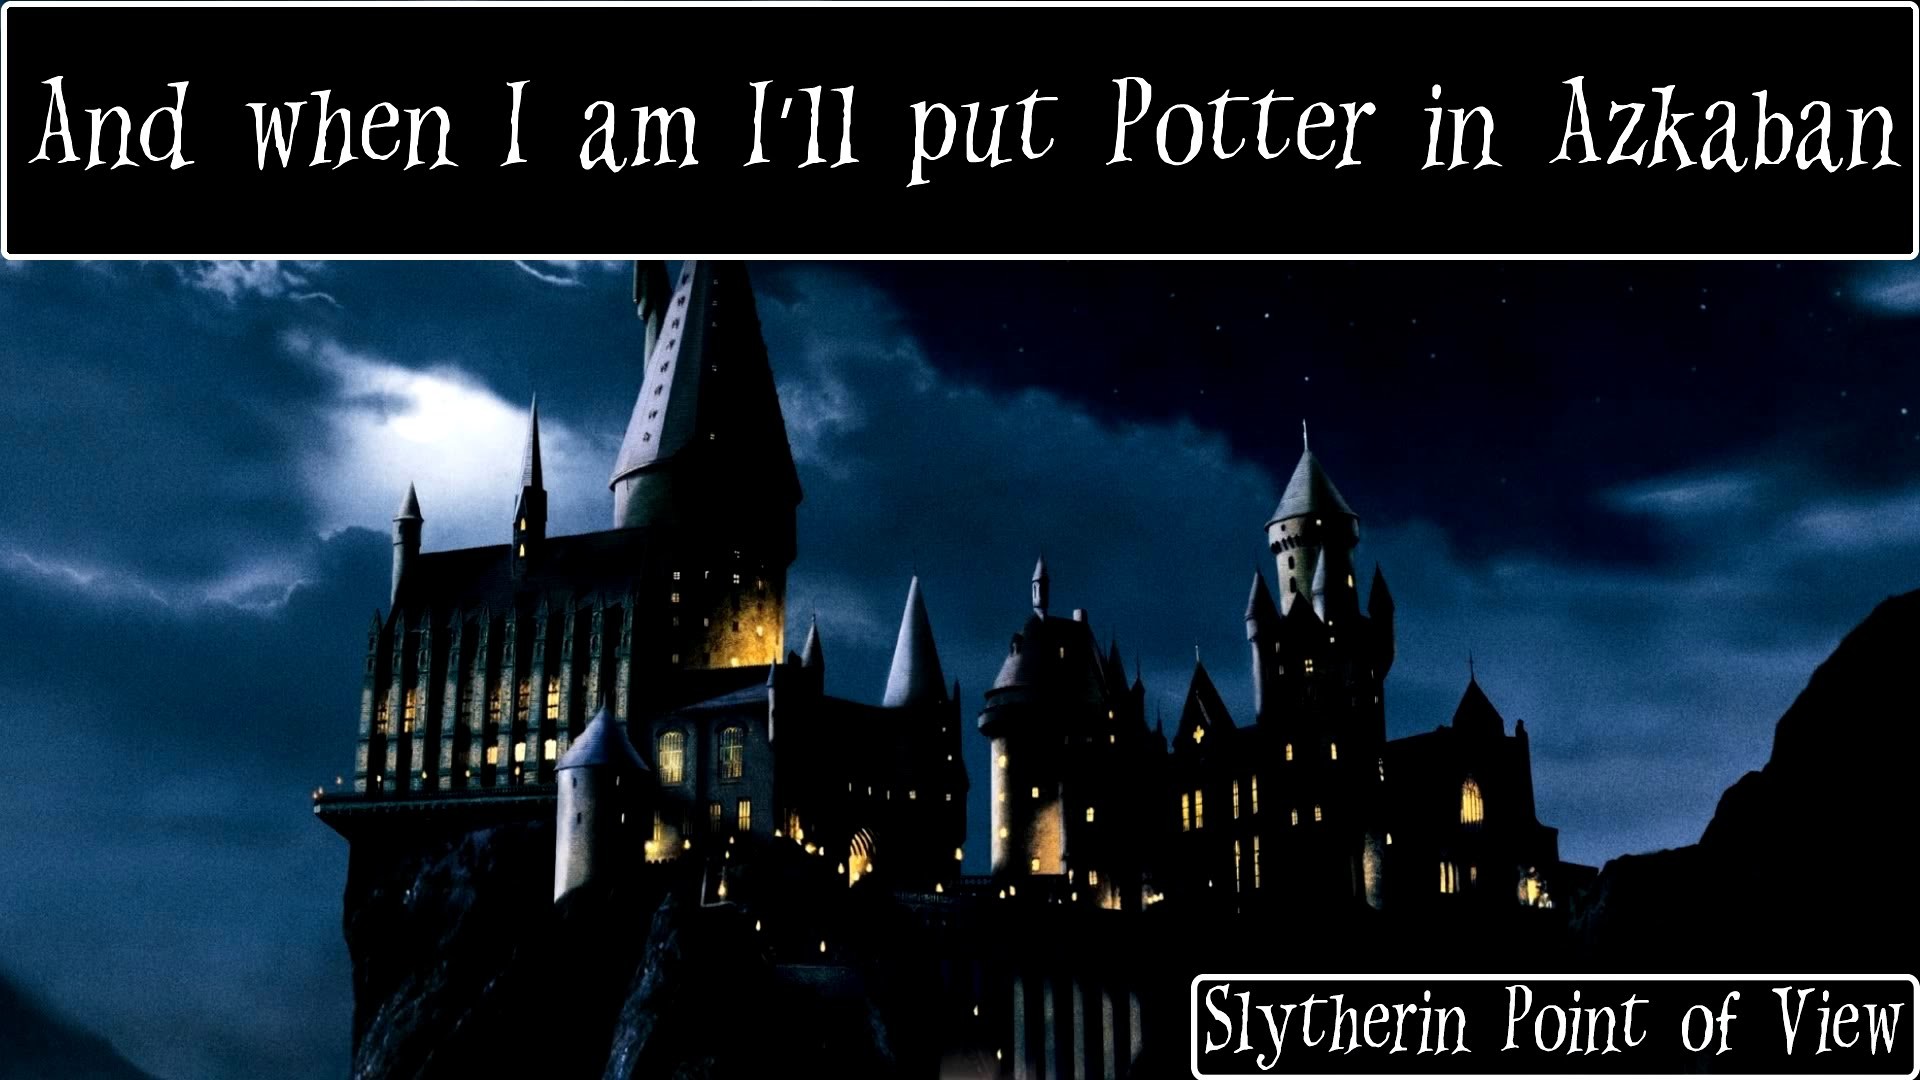 1920x1080 Slytherin Point Of View - Harry Potter Song [On Screen Lyrics]